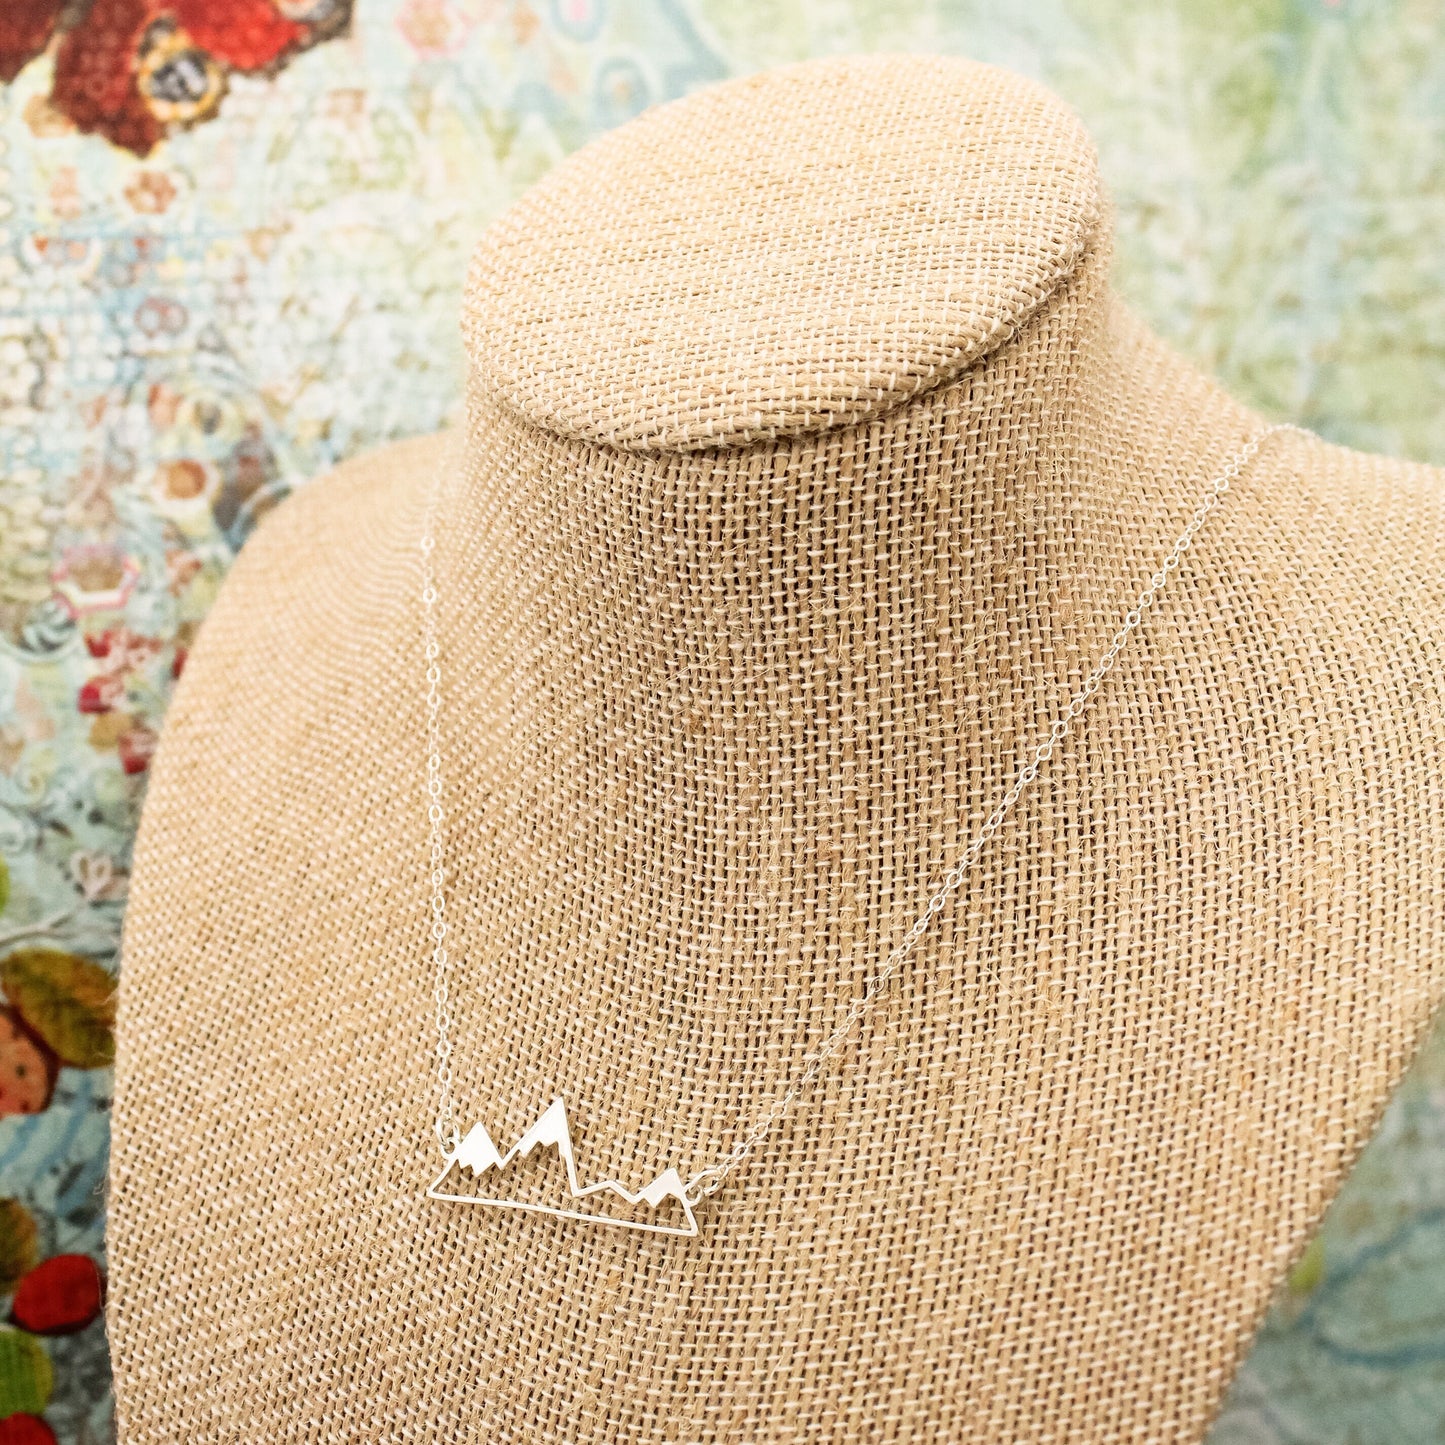 Mountain Necklace Sterling Silver, Horizontal Bar Necklace, Mountain Range Jewelry, Adventure Jewelry, Mountain Jewelry, GPNW Necklace